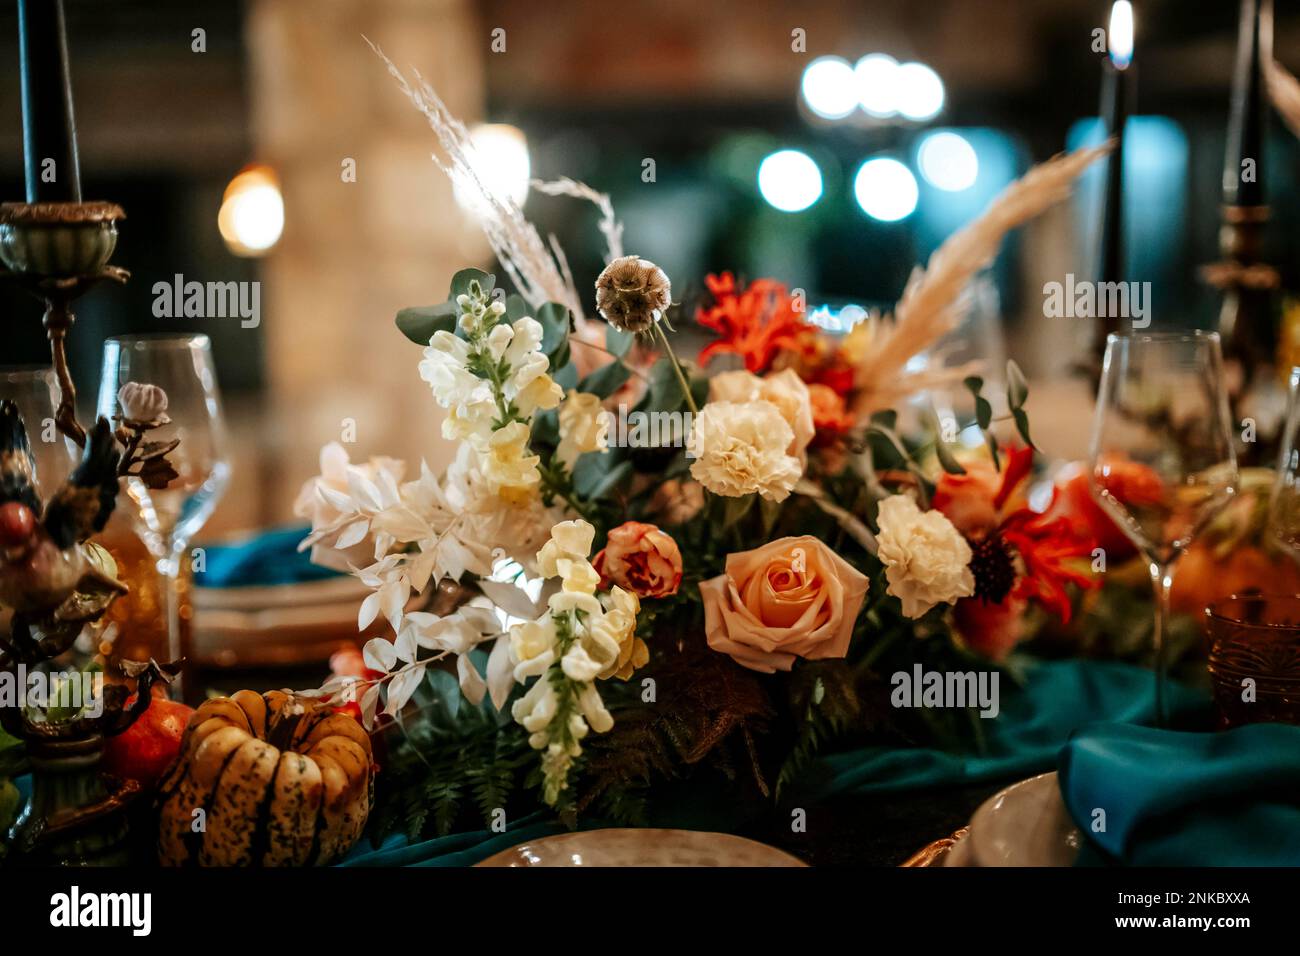 Exquisite, elegant golden and blue table set decoration in moody dark colors Stock Photo